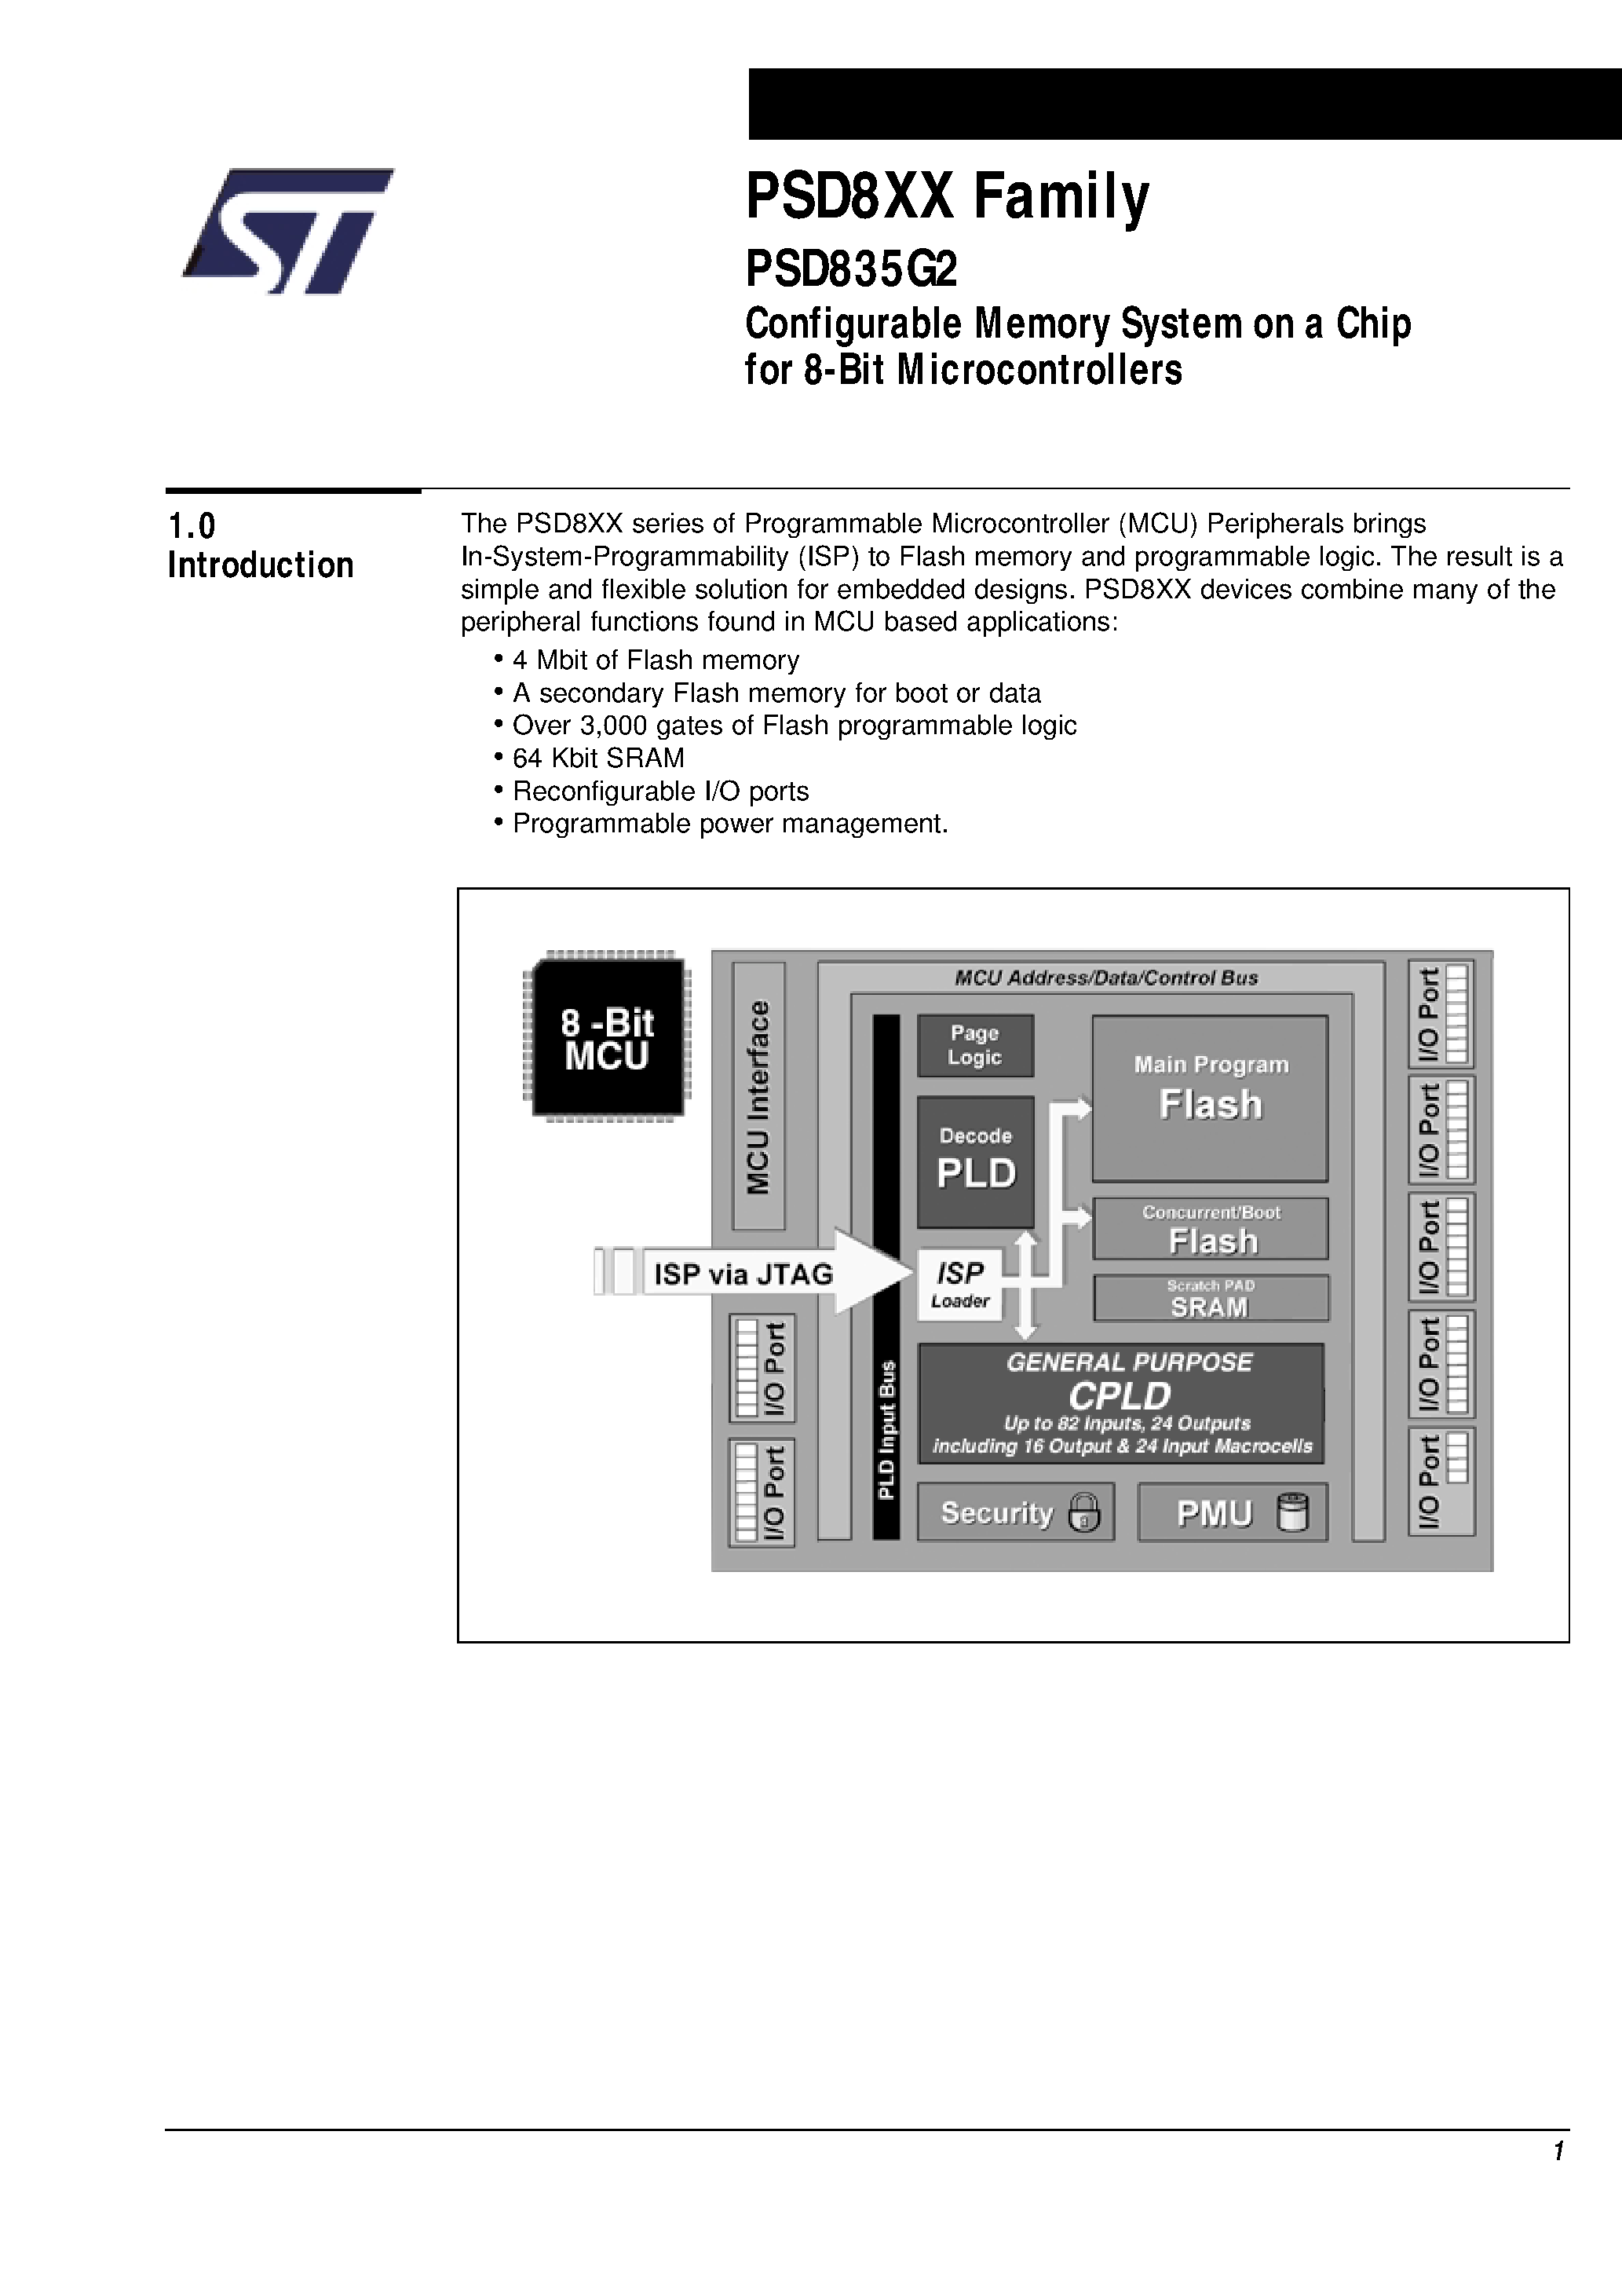 Datasheet PSD835F1V-A-15B81 - Configurable Memory System on a Chip for 8-Bit Microcontrollers page 2